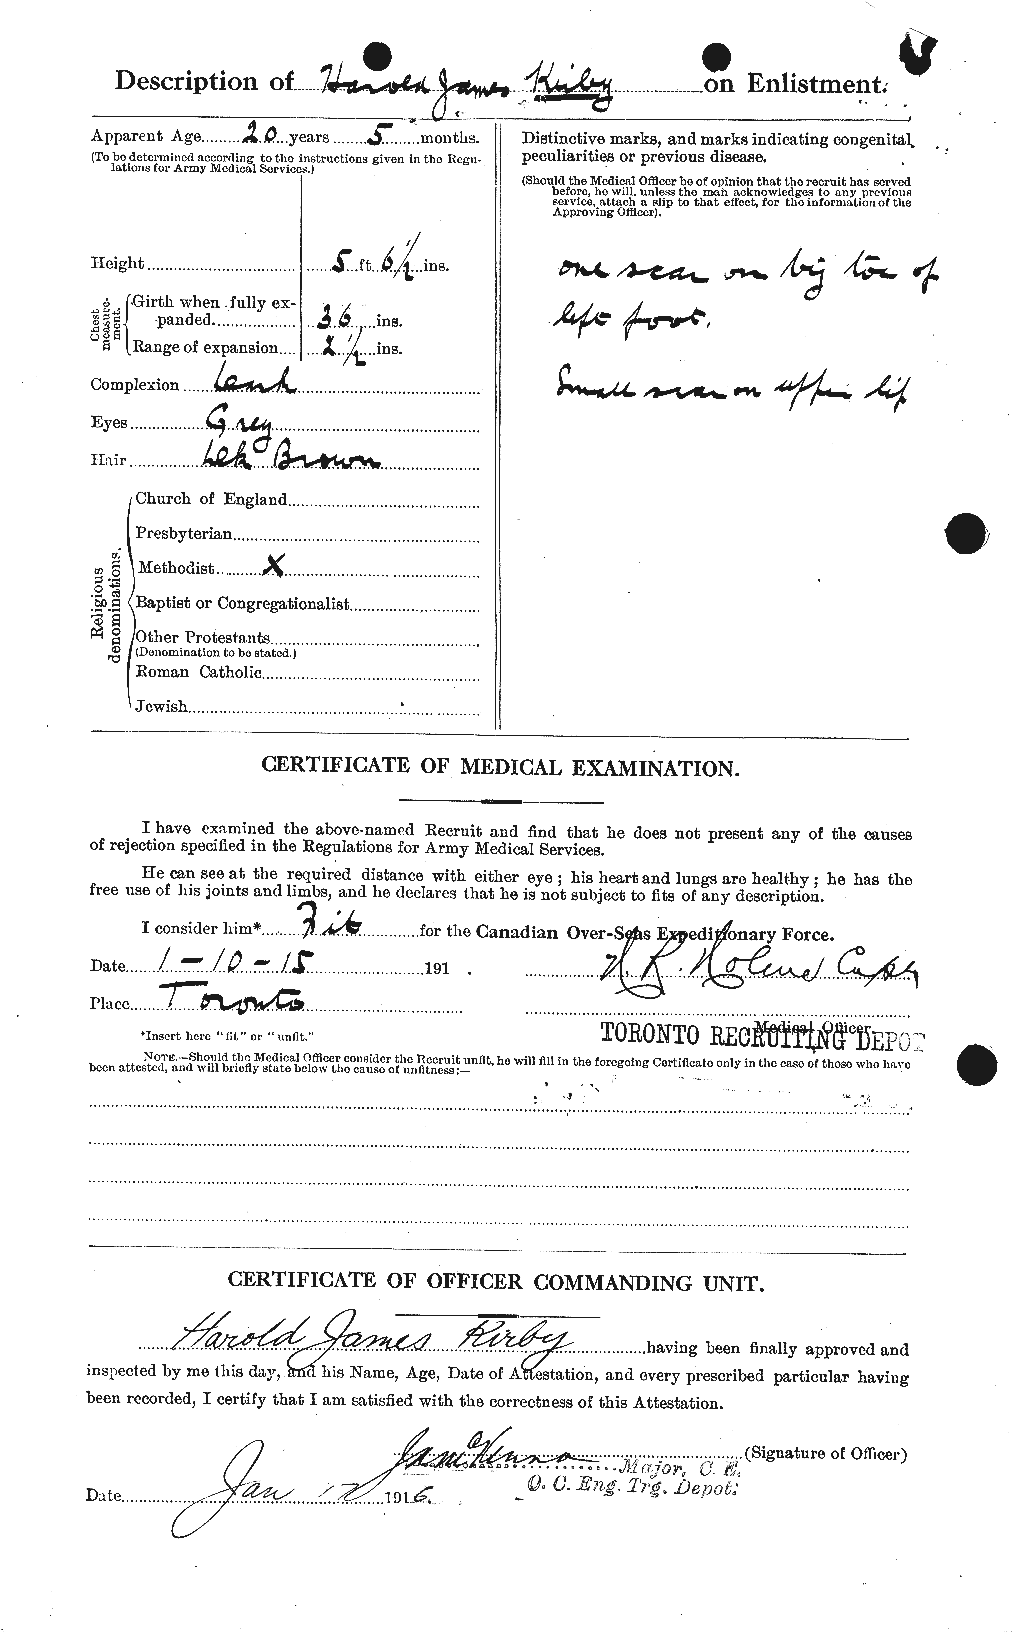 Personnel Records of the First World War - CEF 437206b